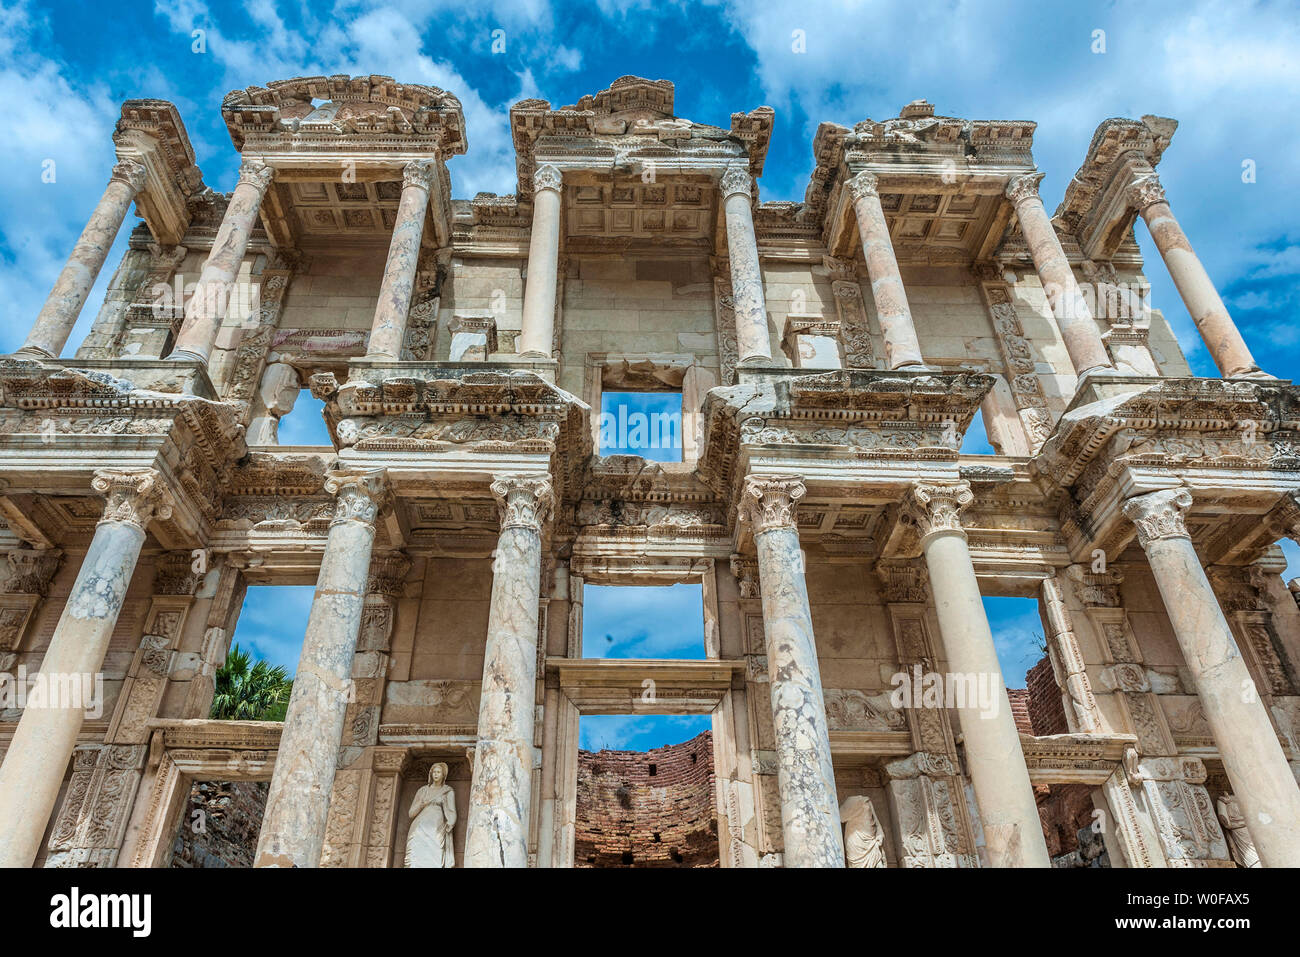 Turkey, Roman archeological site of Ephesus (4th century BC, important role in the spread of Christianity), Corinthian tabernacle facade of the Celsus library (110 AC, by the consul Julius Aquila) (UNESCO World Heritage) Stock Photo